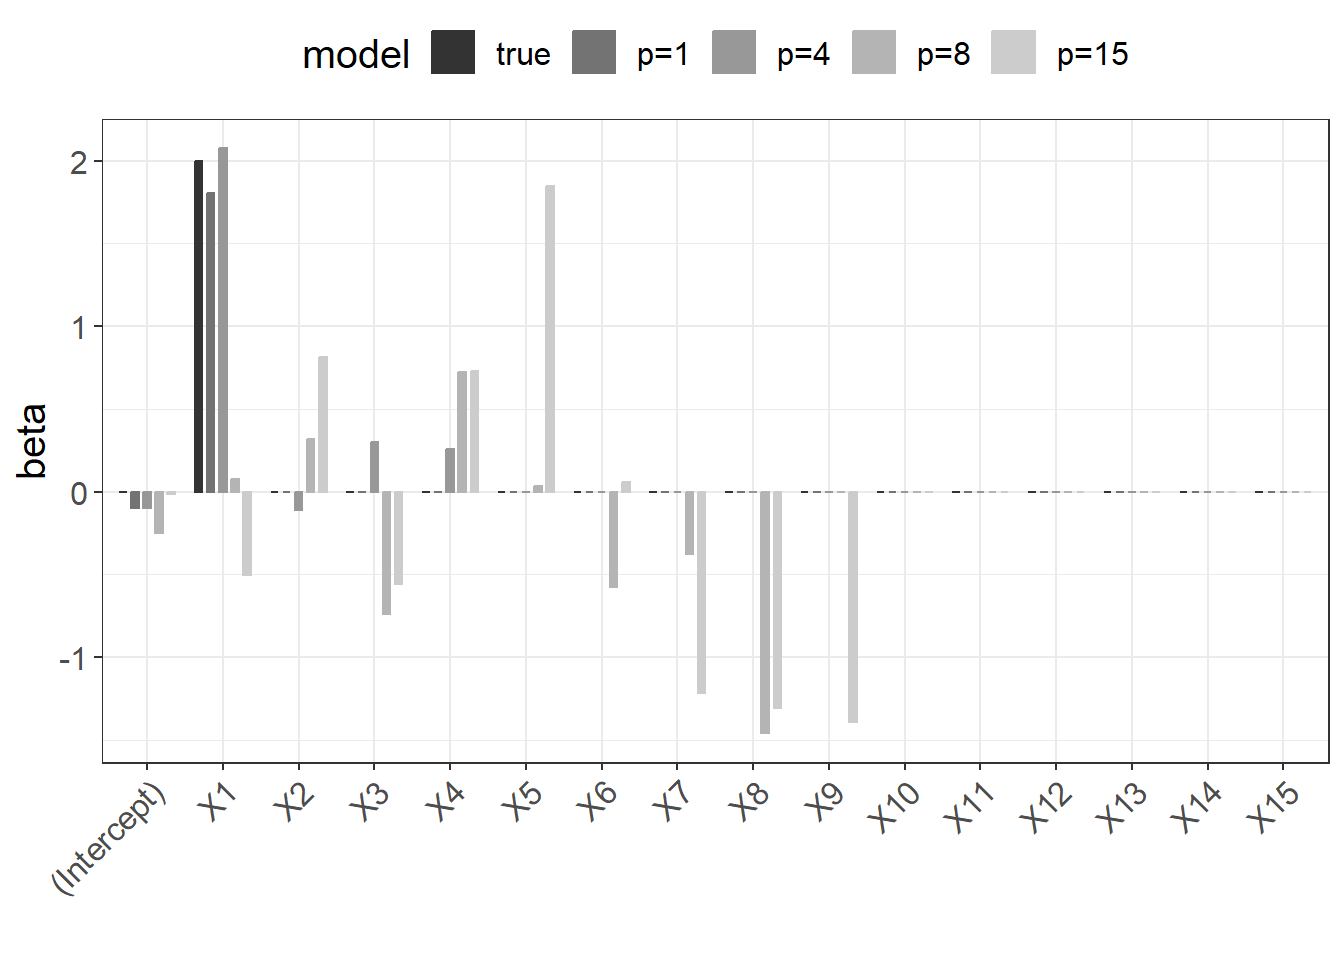 Regression coefficients for models with increasing $p$.